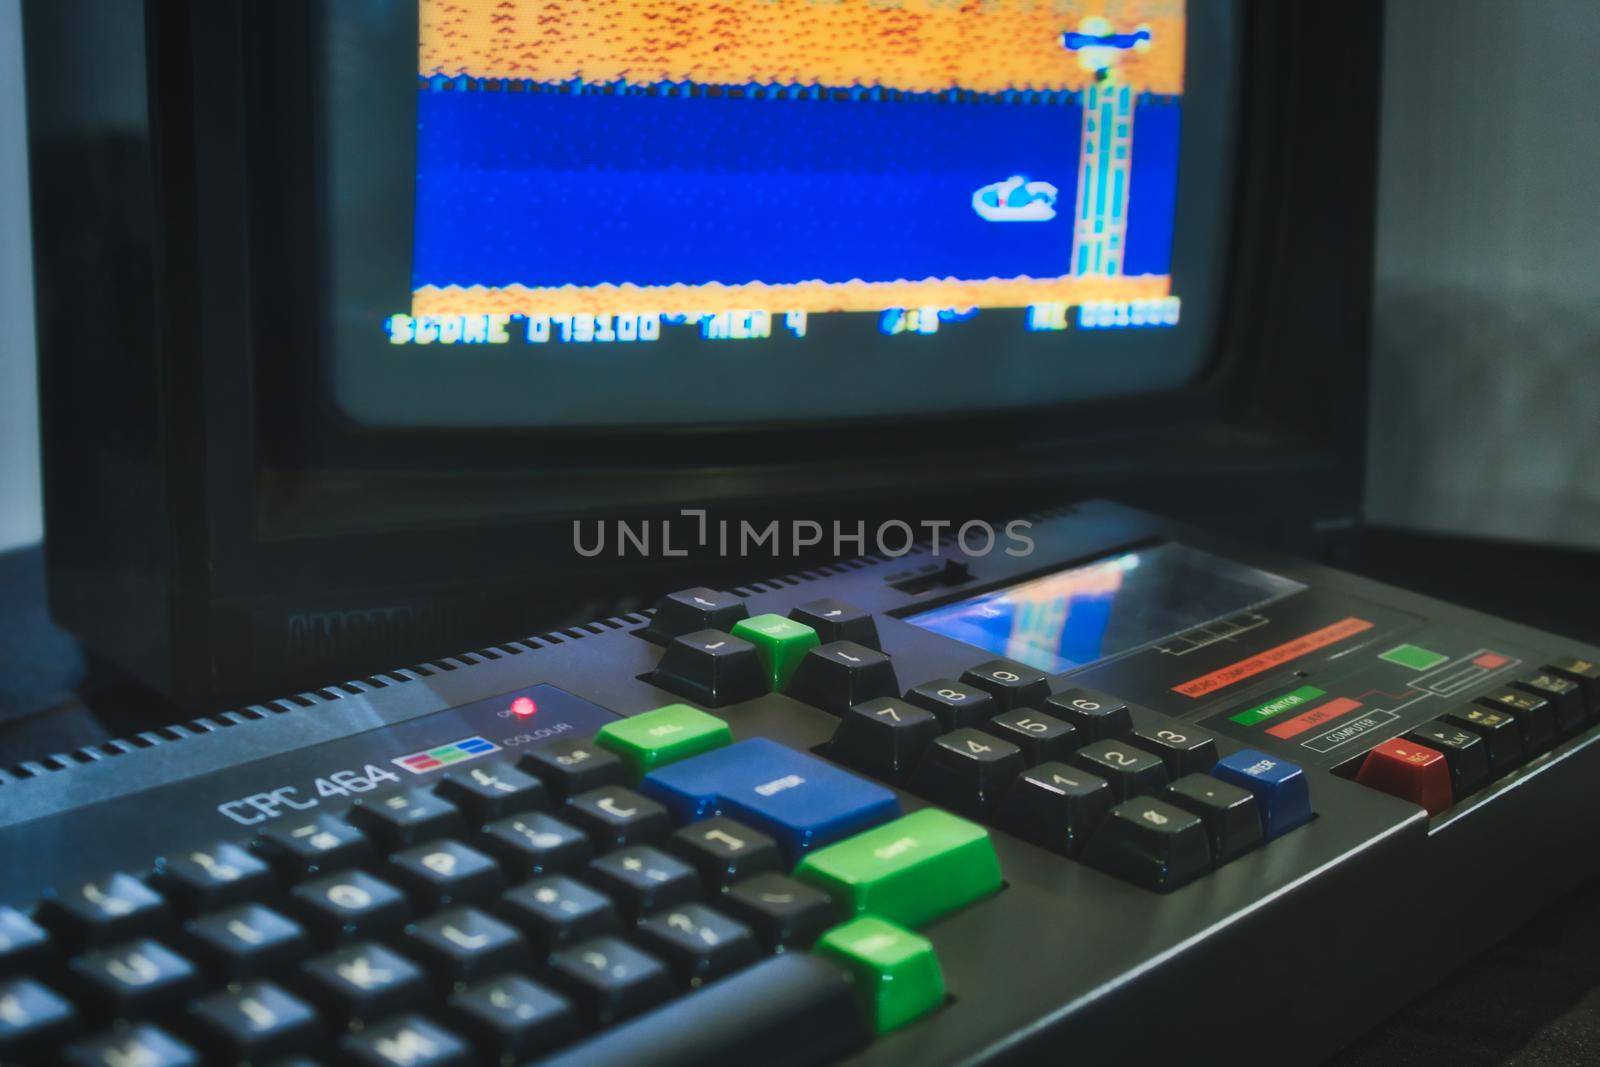 Mosta / Malta - July 3 2019: Amstrad CPC 464 keyboard and monitor displaying a retro computer game by tennesseewitney